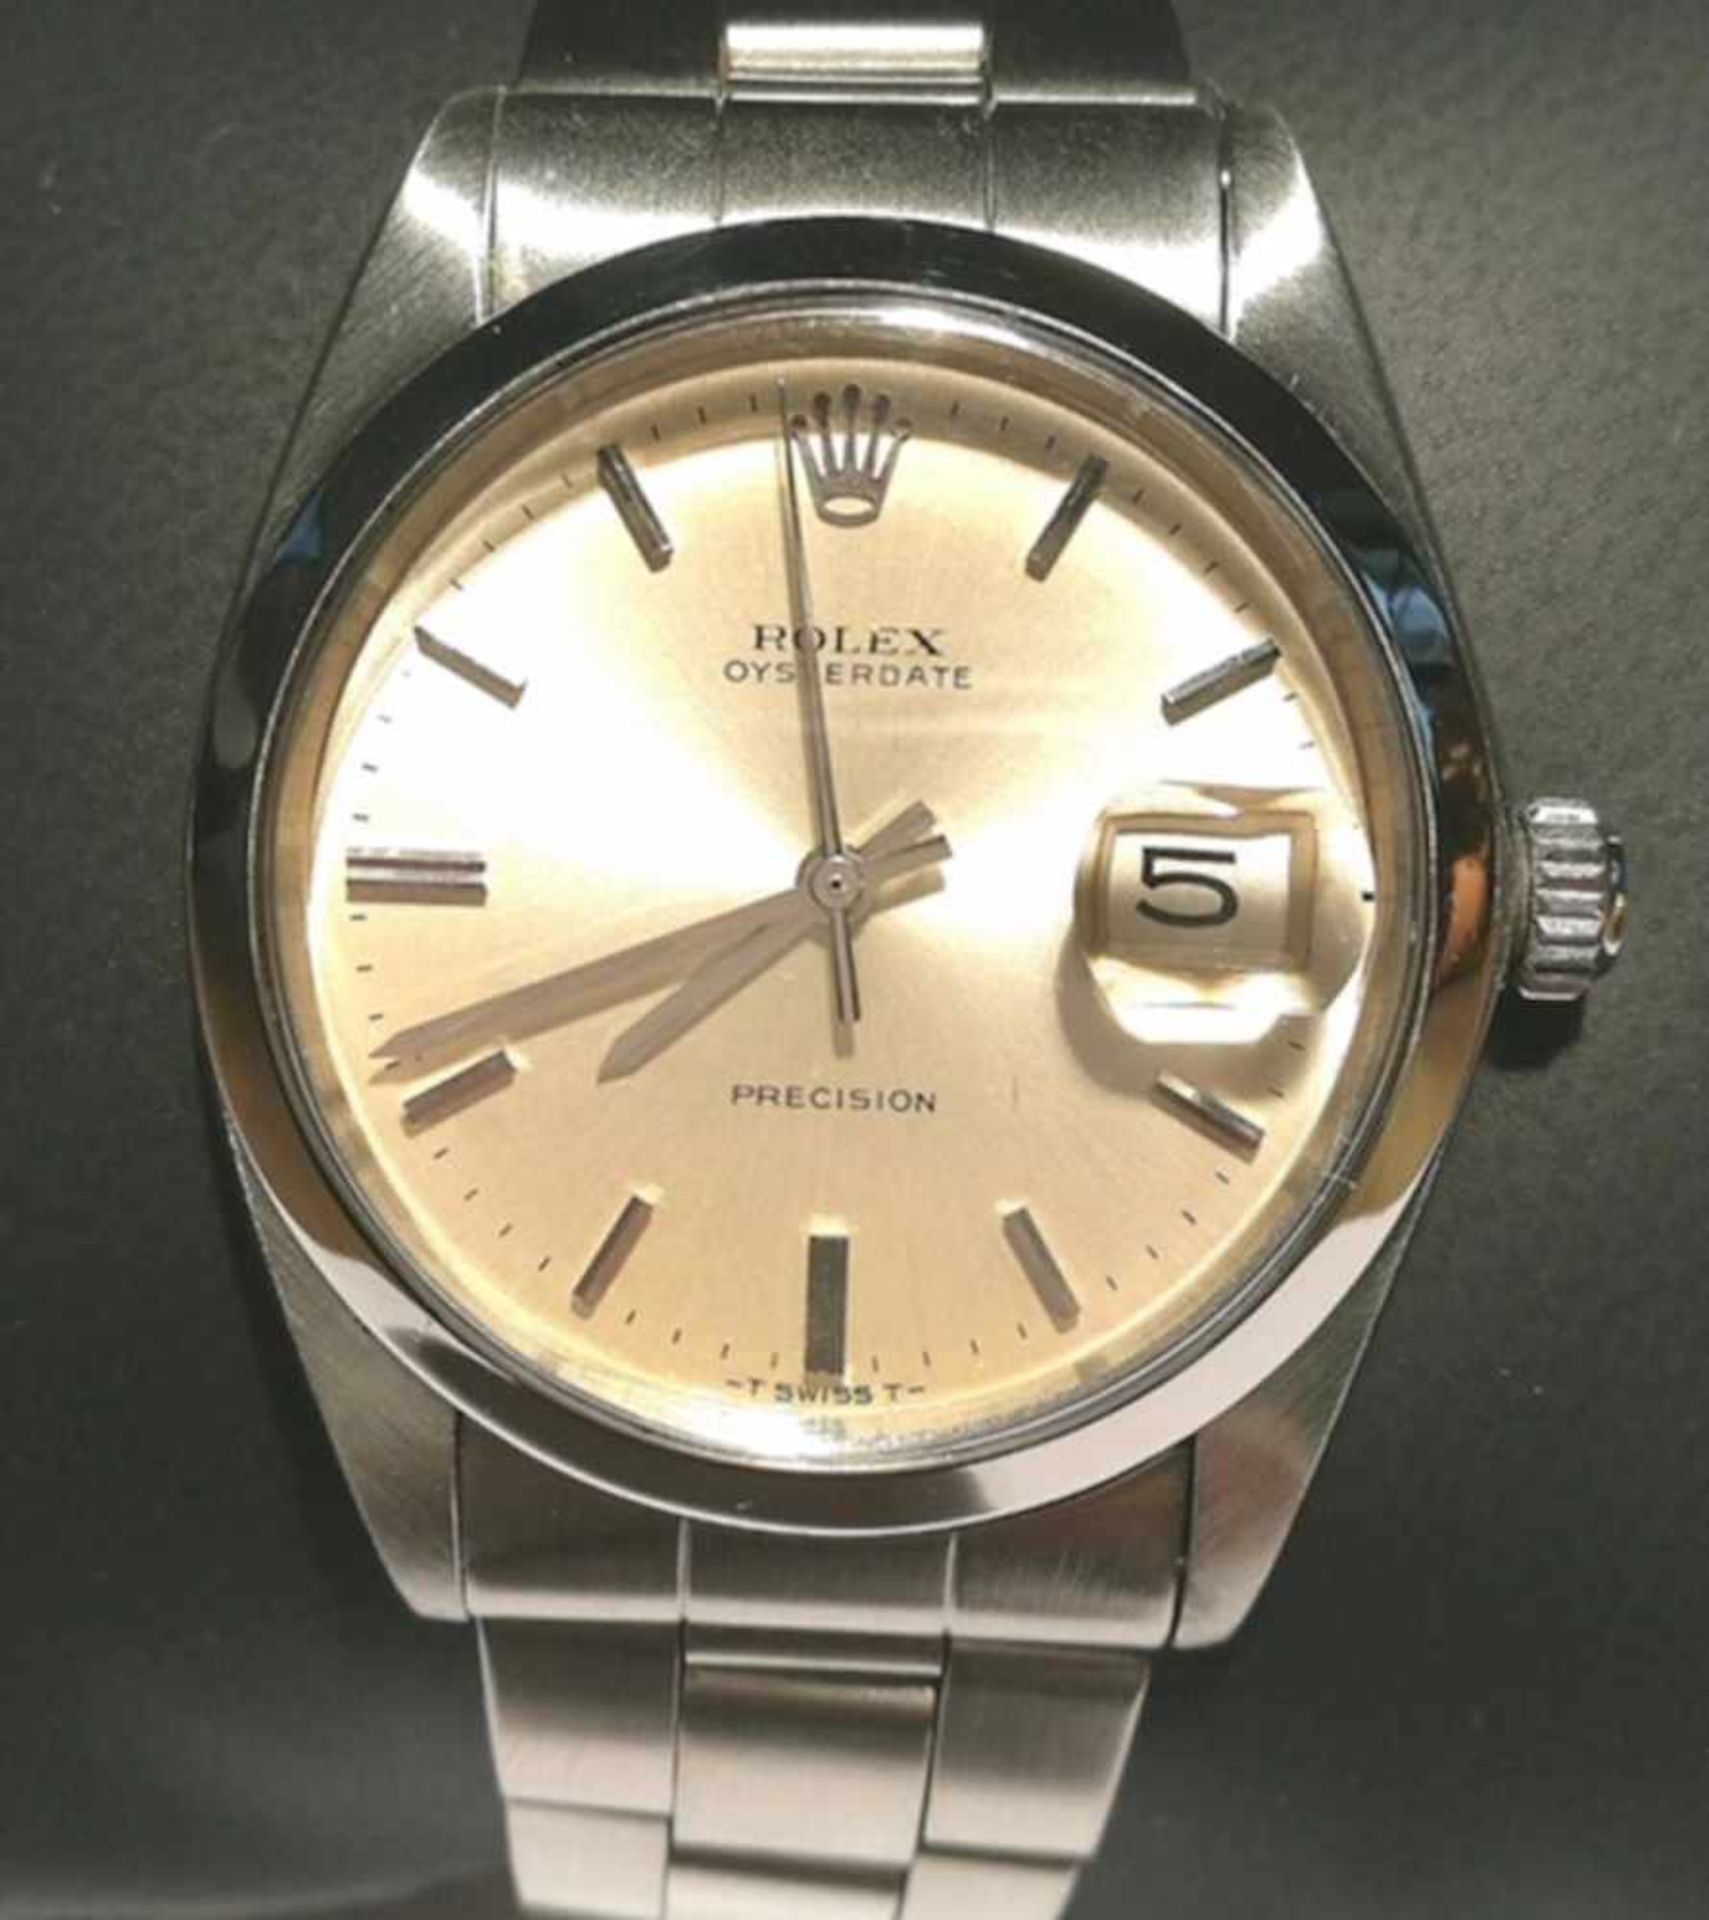 Rolex Date Precision Ref.6694, No box and papers